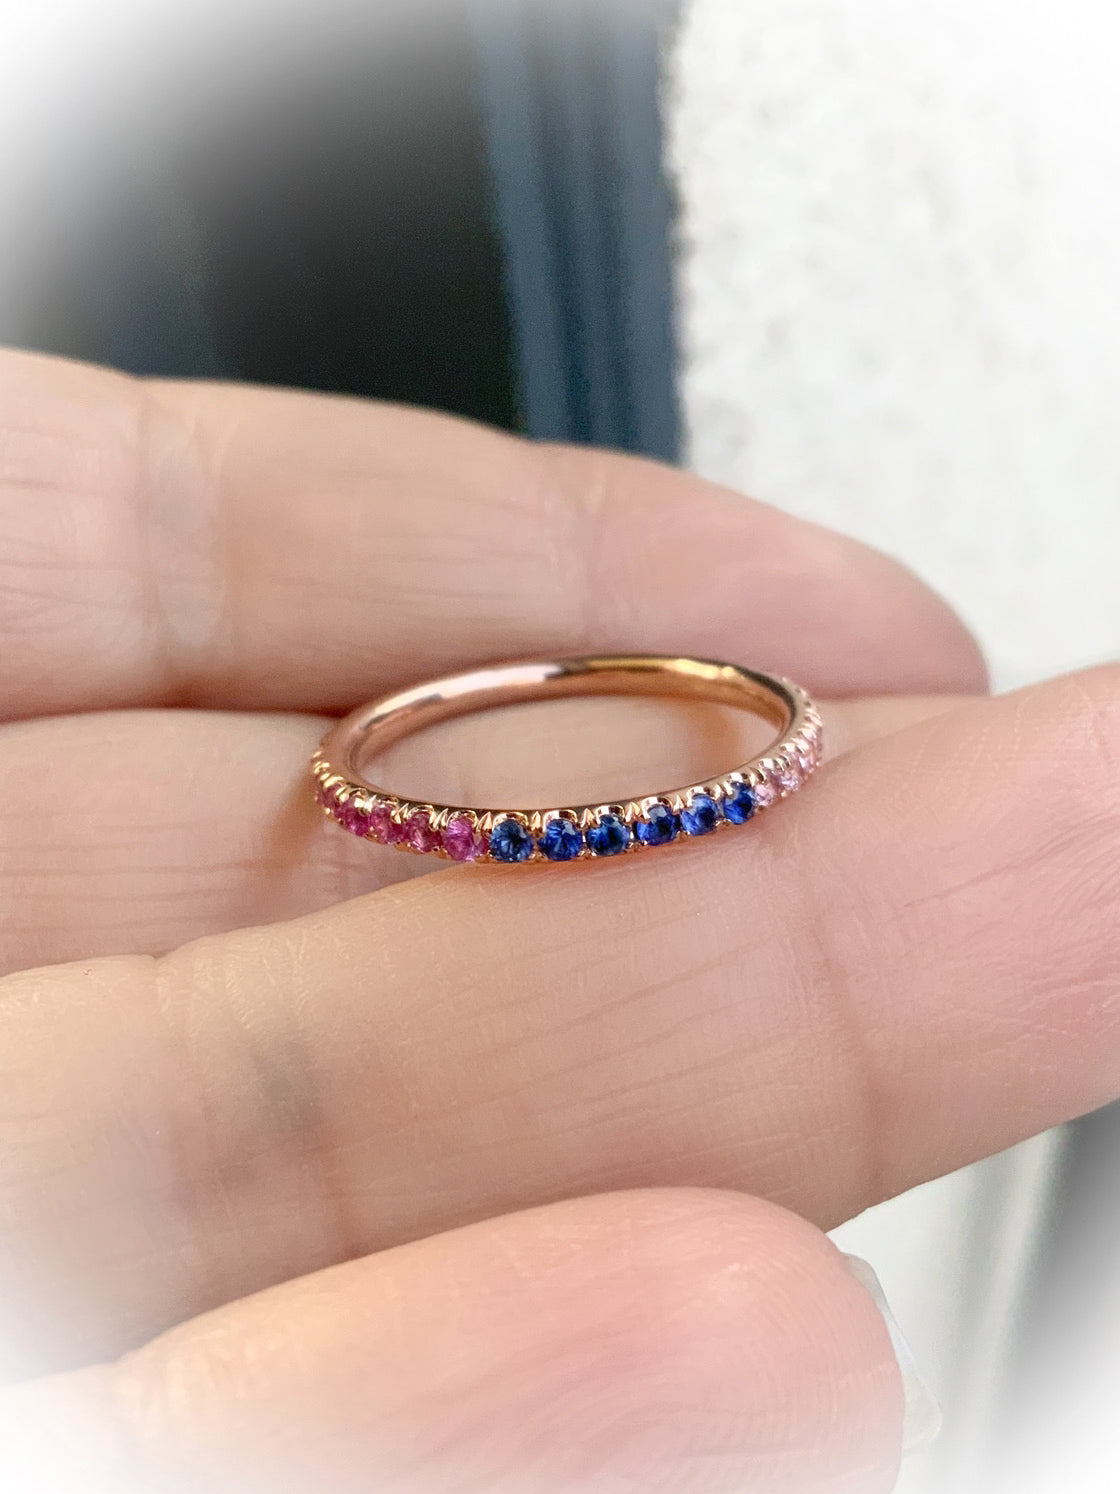 Blue Pink Sapphire Pave Band/ 2mm Full Eternity Ombré Pink Sapphire & Blue Sapphire Stacking Ring/ Mix Color Sapphire Band/ Gold or Platinum